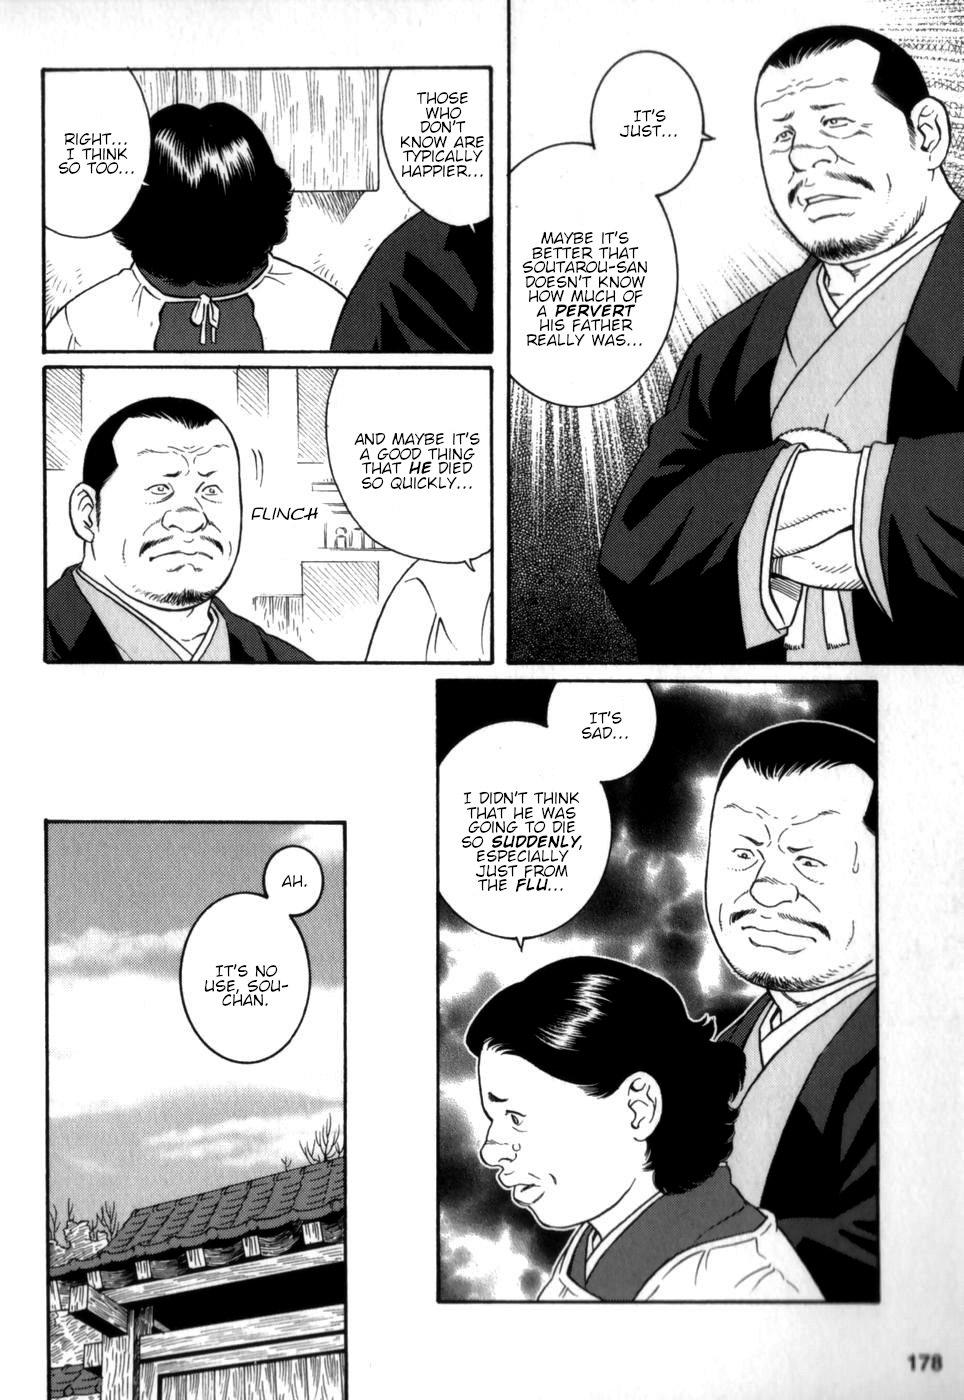 Danish Gedou no Ie Chuukan | House of Brutes Vol. 2 Ch. 6 Footfetish - Page 12